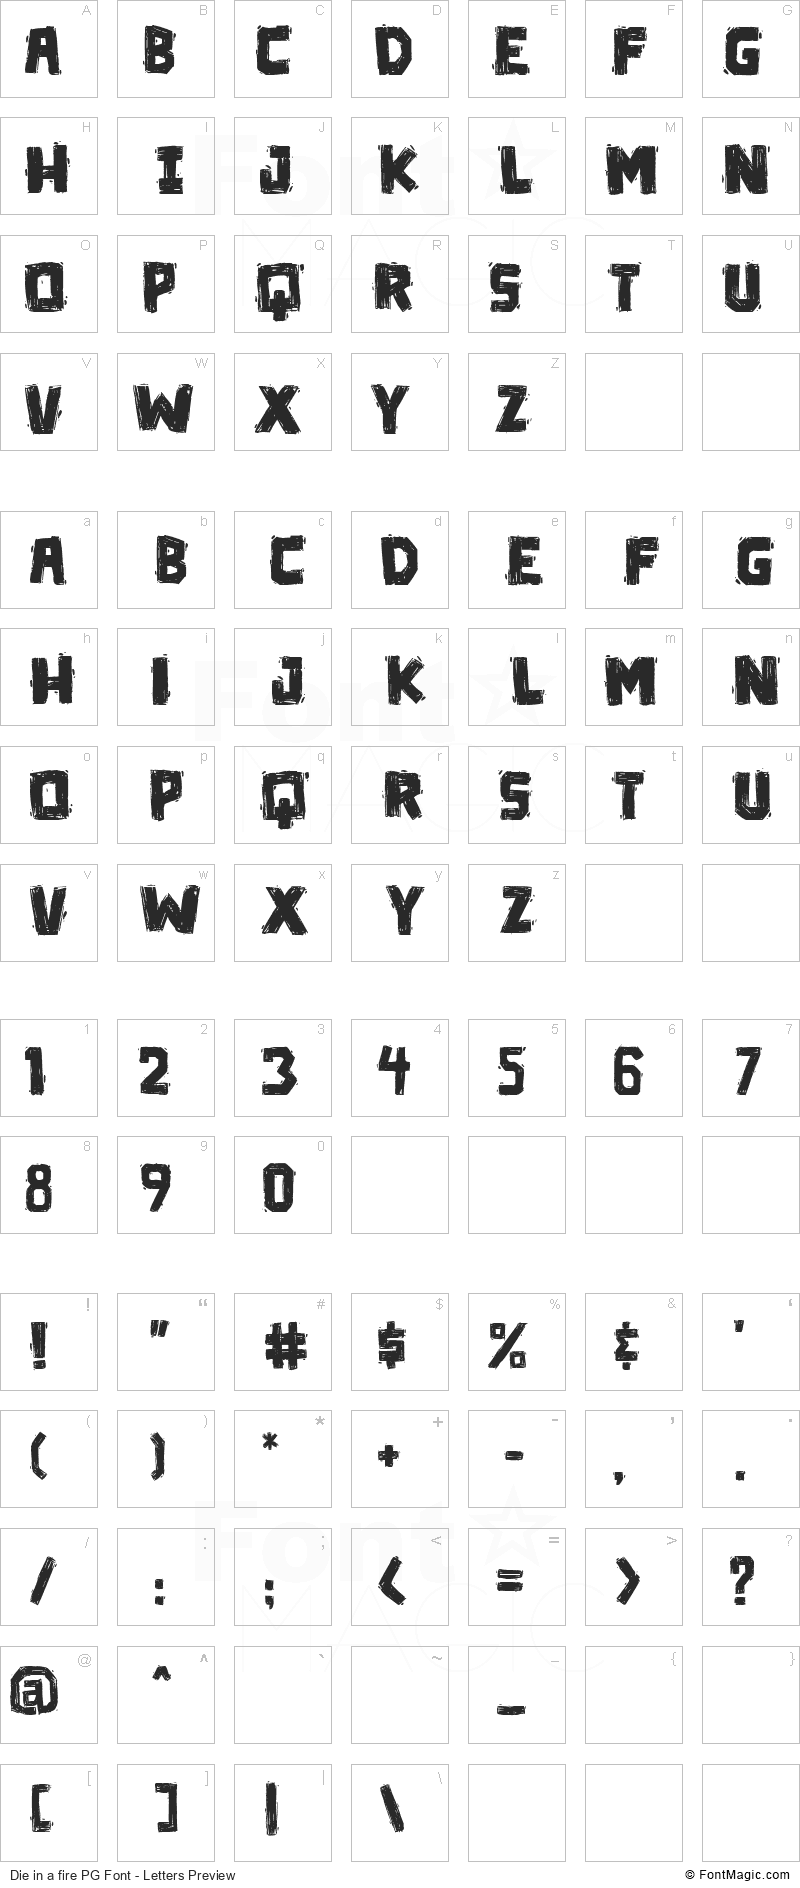 Die in a fire PG Font - All Latters Preview Chart